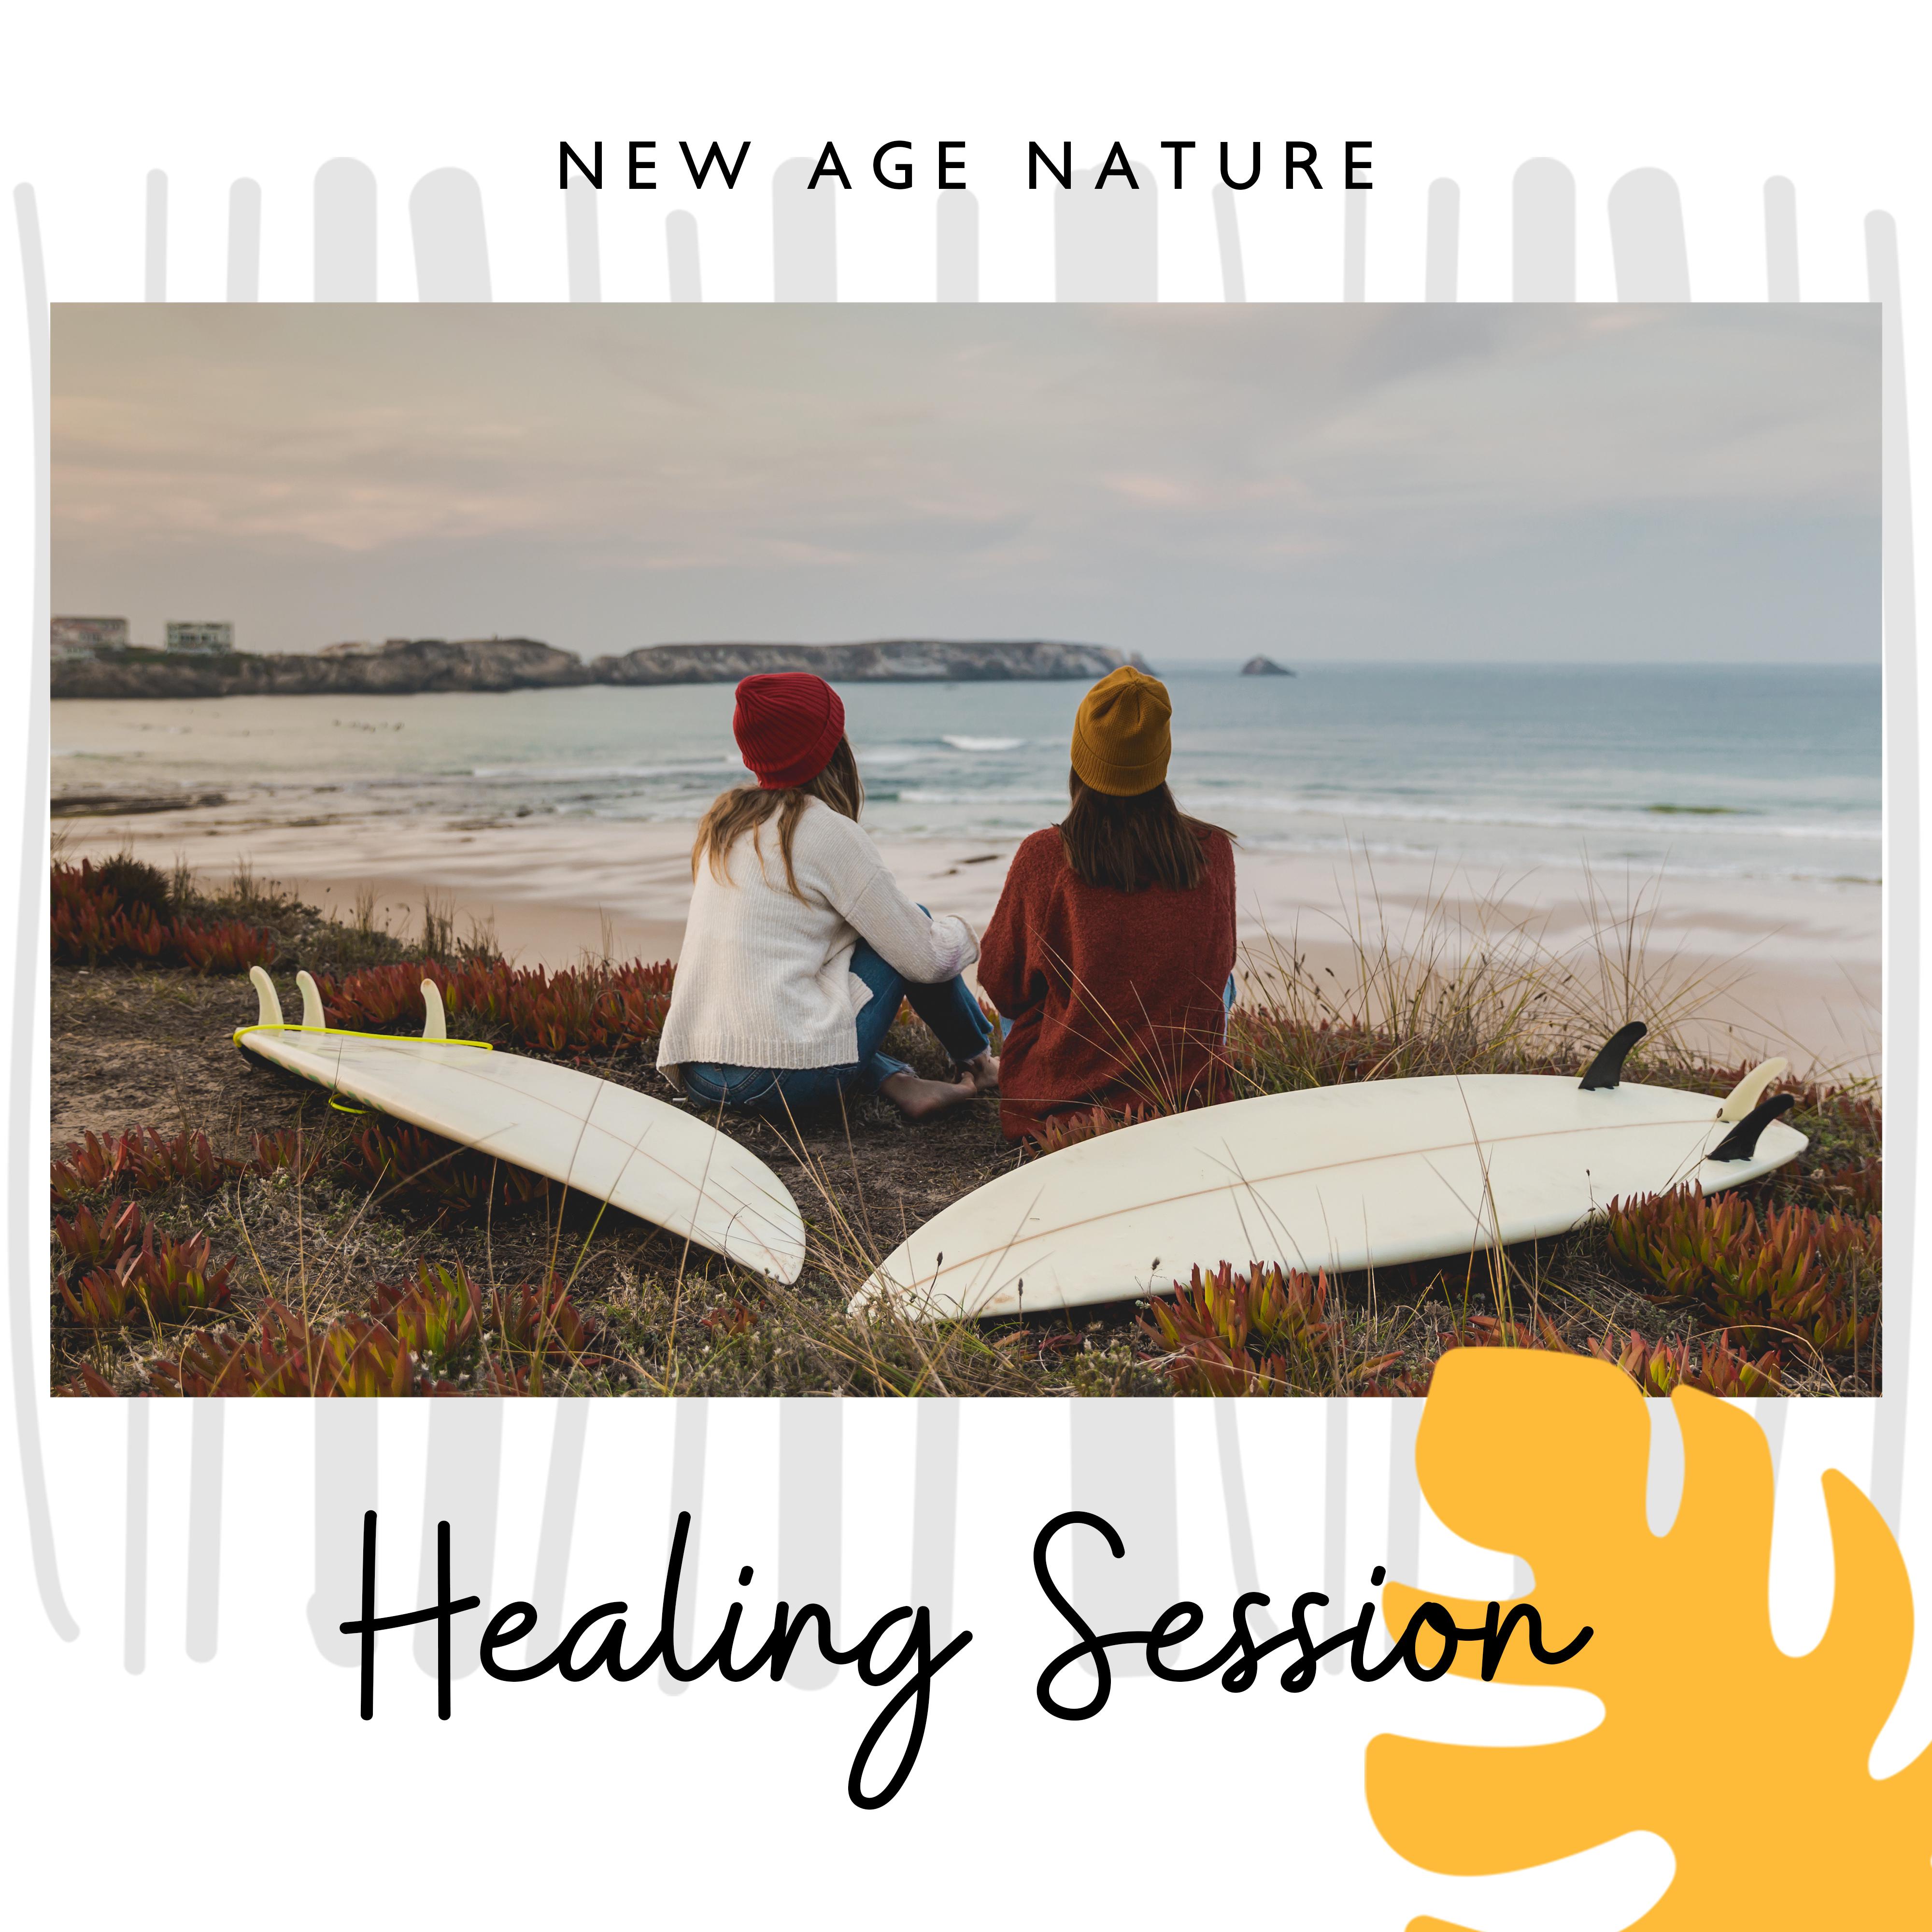 New Age Nature Healing Session – 2019 New Age Music with Nature Sounds for Body & Soul Healing, Calming Down, Massage Therapy Background Songs